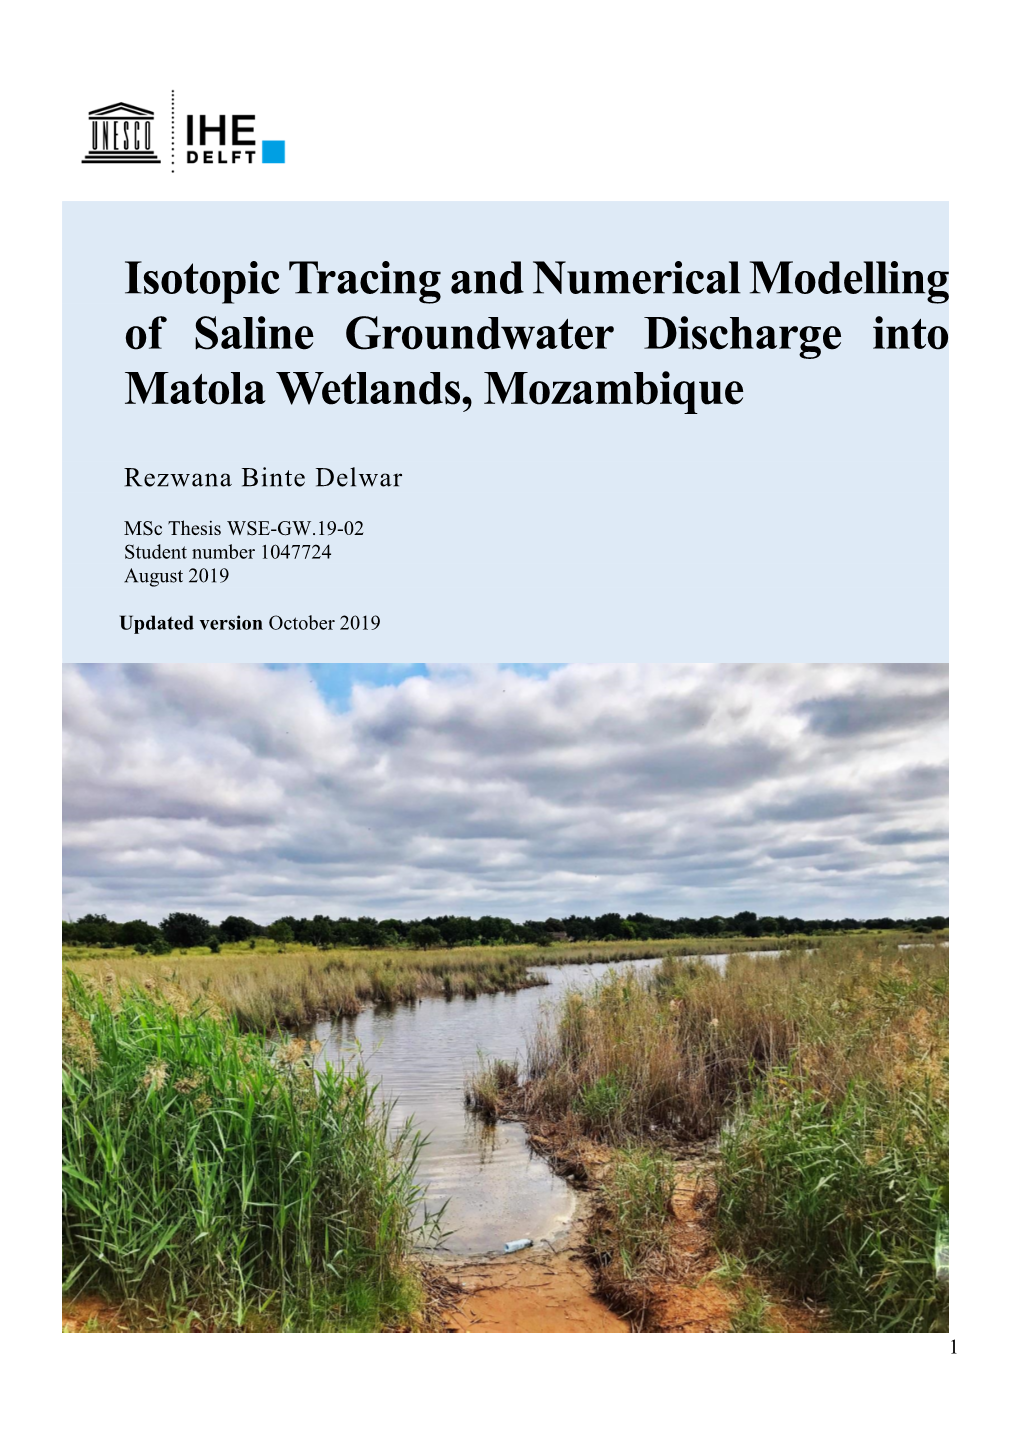 Isotopic Tracing and Numerical Modelling of Saline Groundwater Discharge Into Matola Wetlands, Mozambique